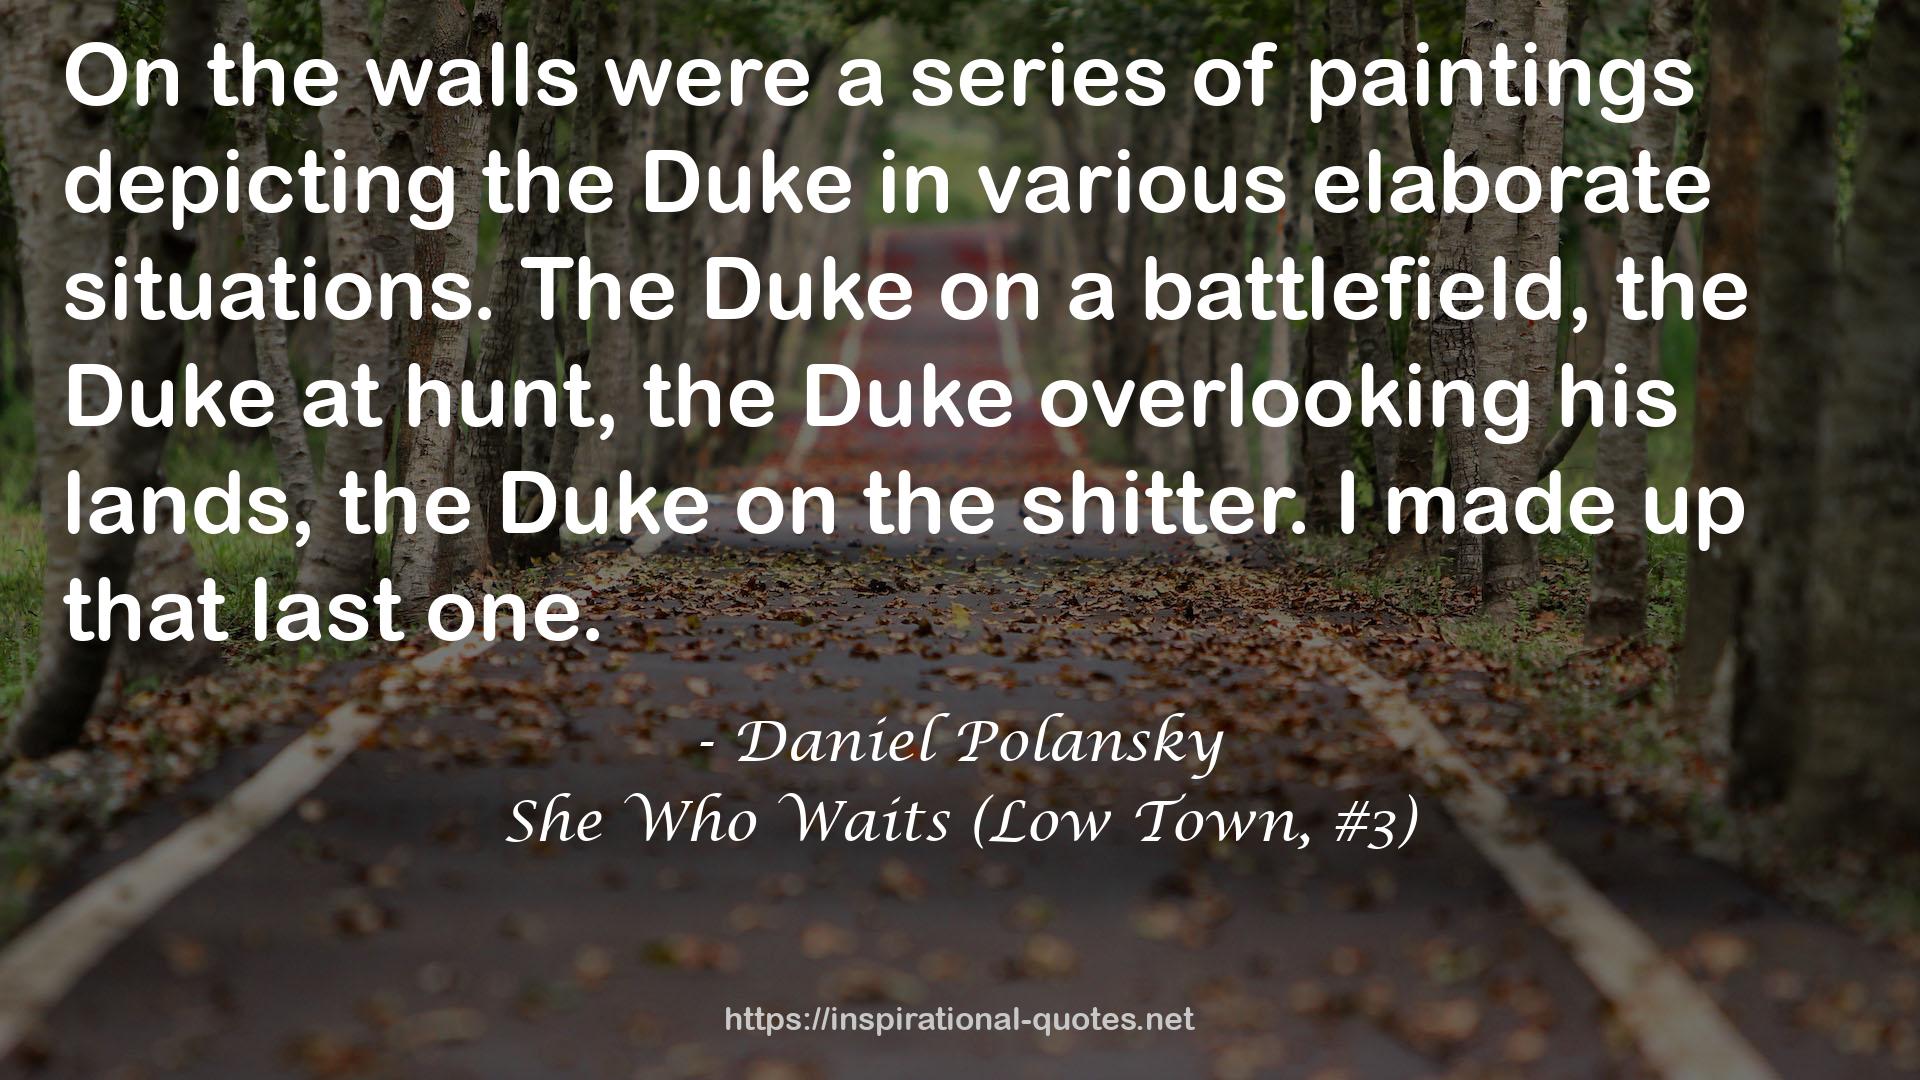 She Who Waits (Low Town, #3) QUOTES